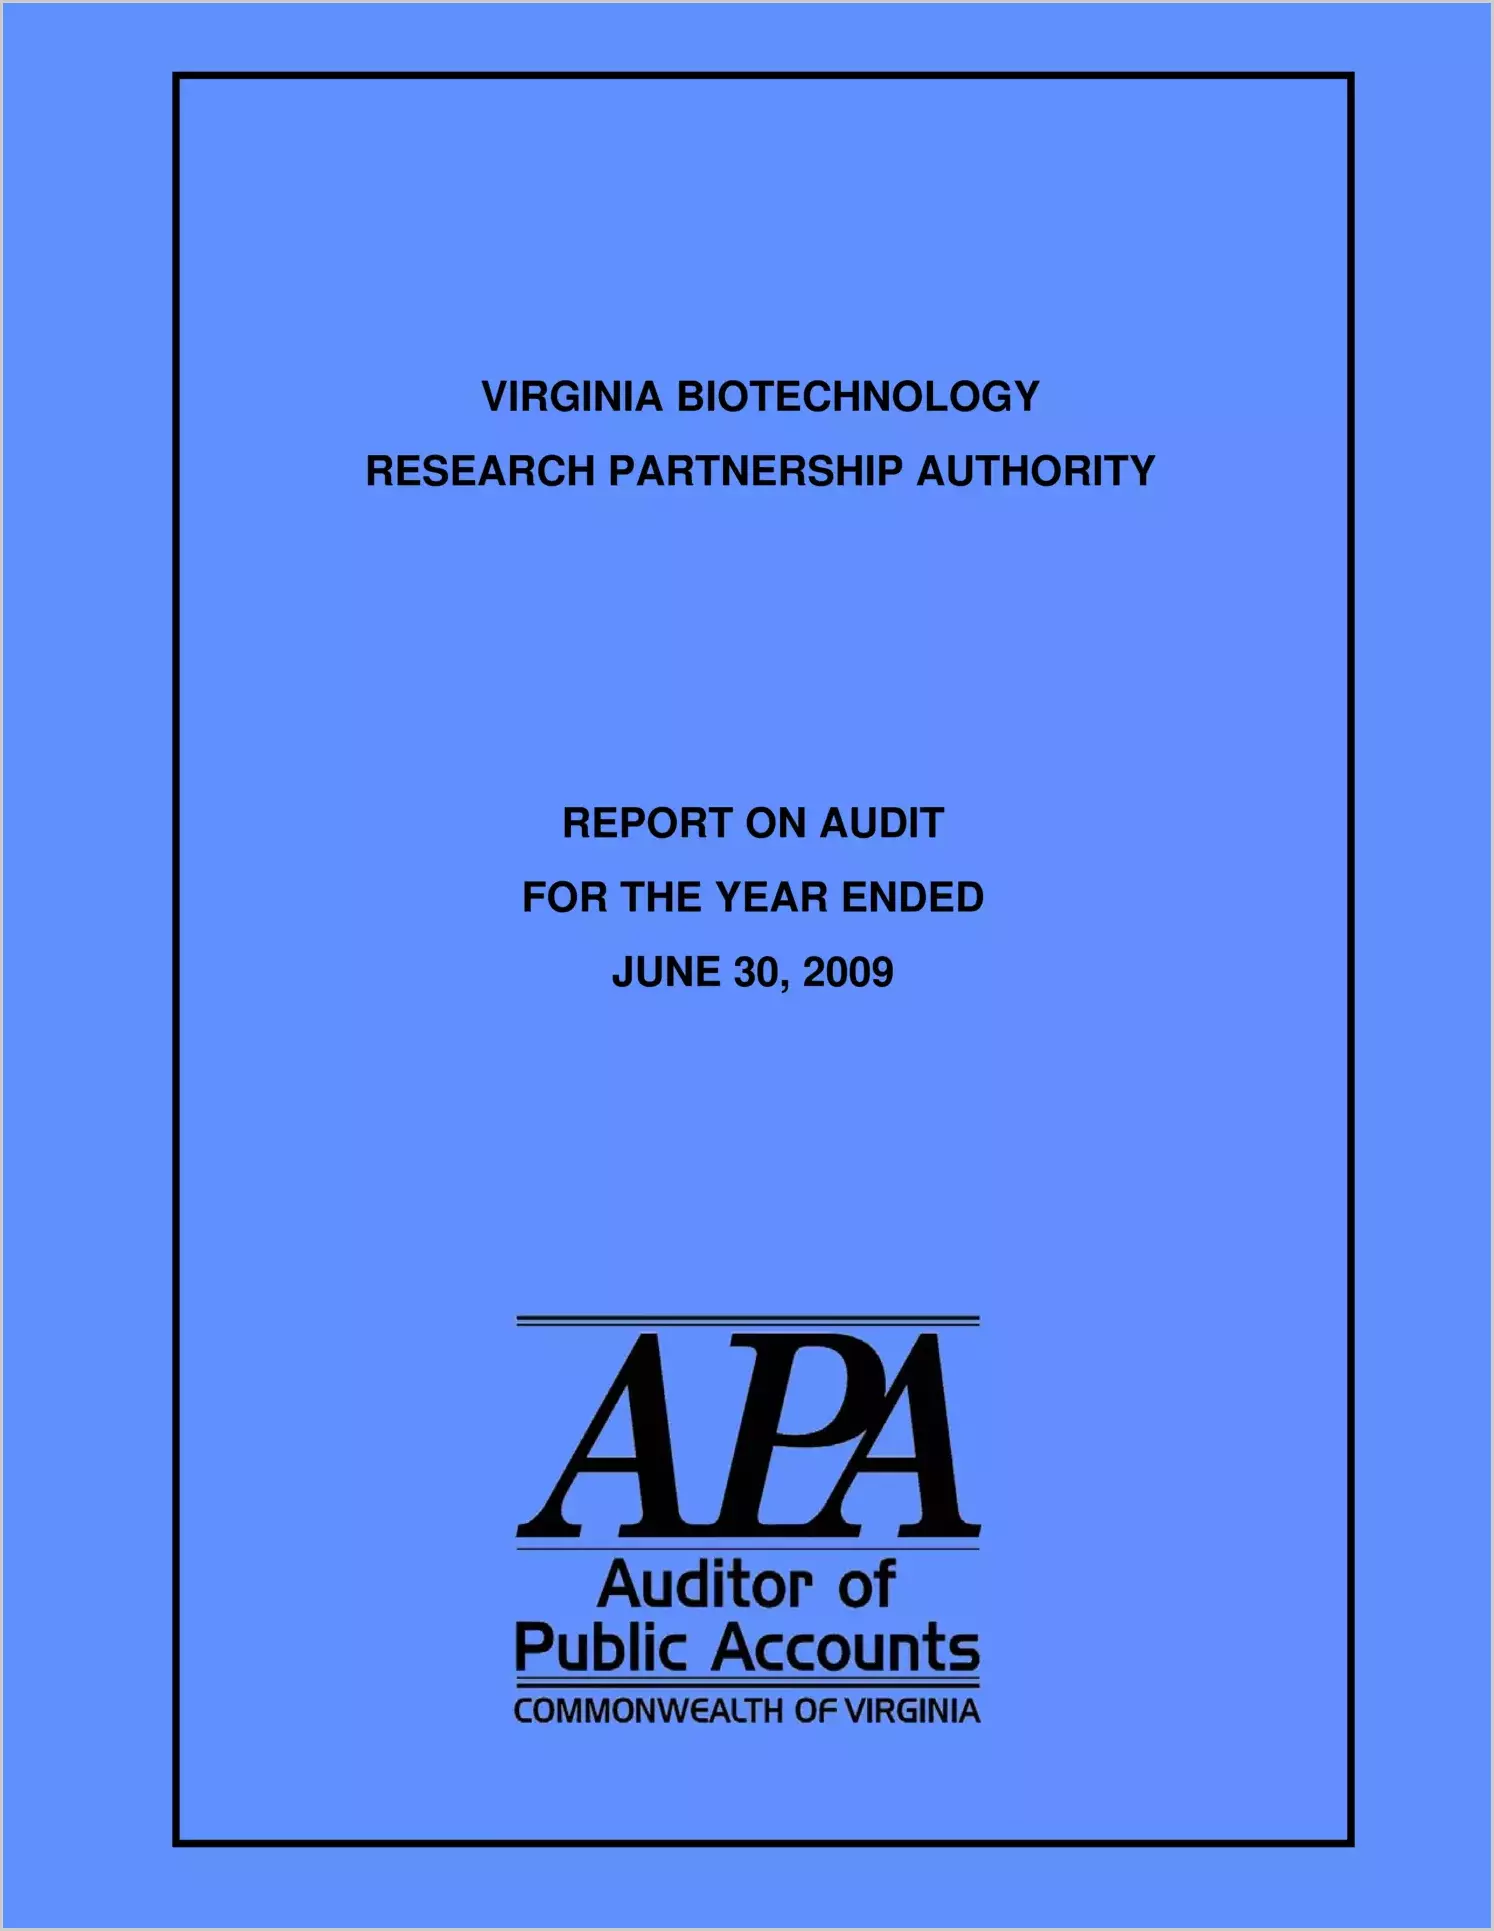 Virginia Biotechnology Research Parntership Authority for the year ended June 30, 2009